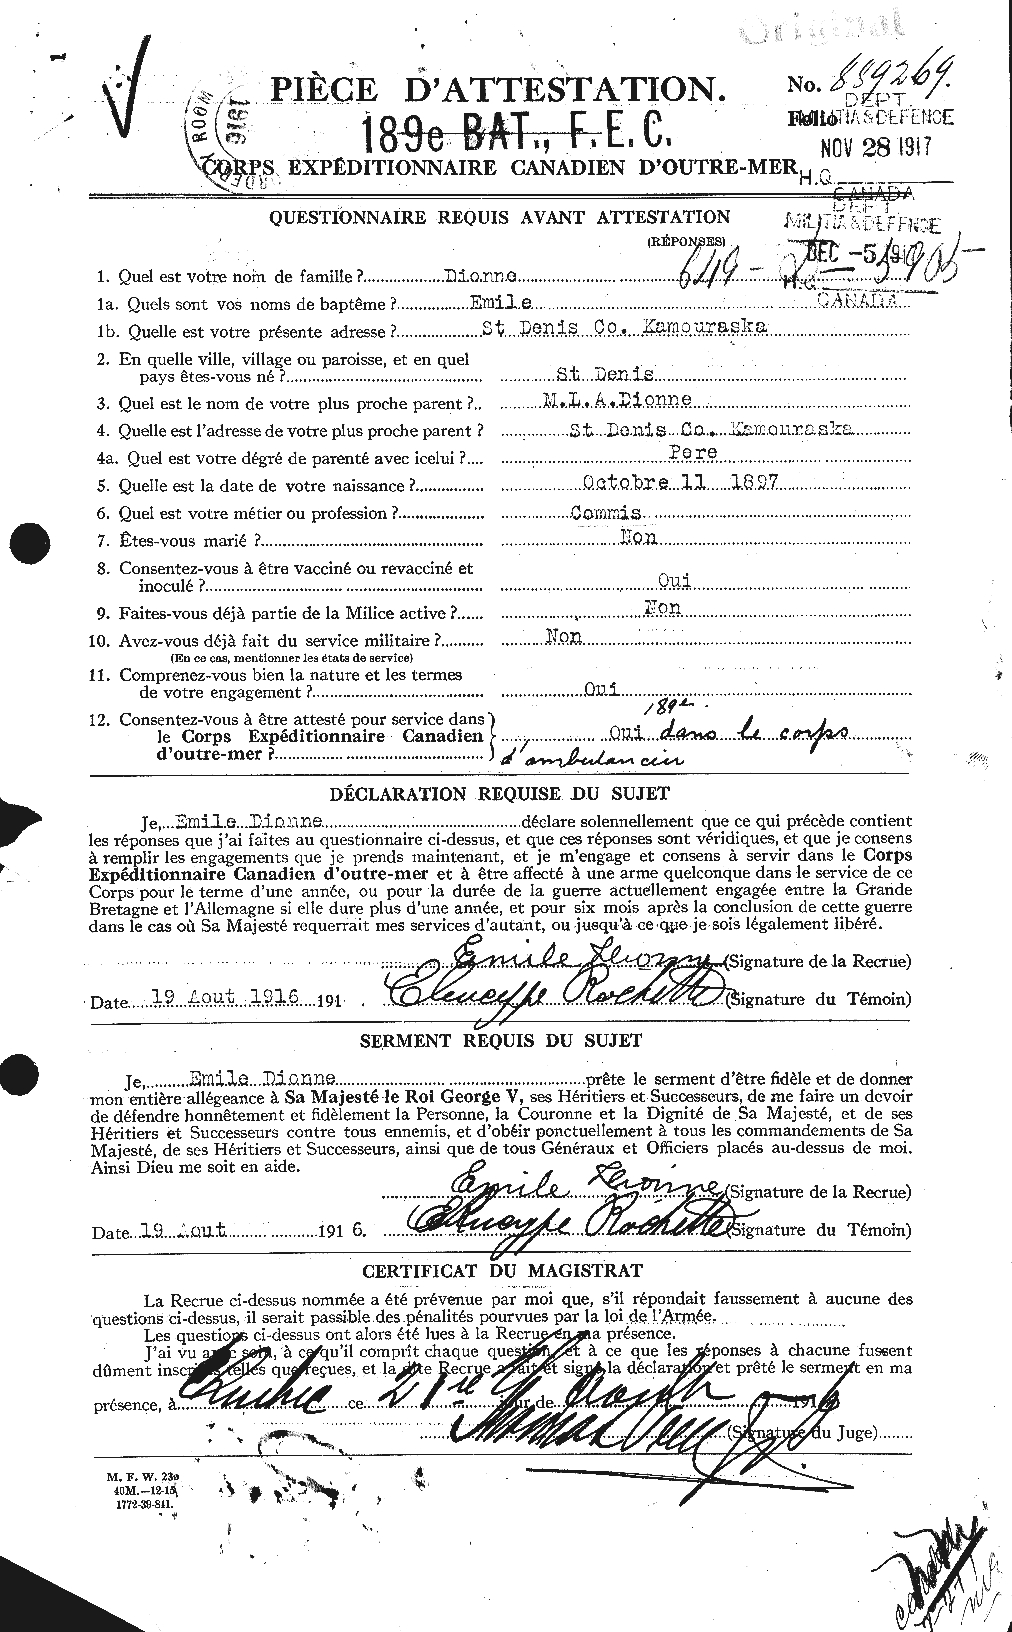 Personnel Records of the First World War - CEF 292585a